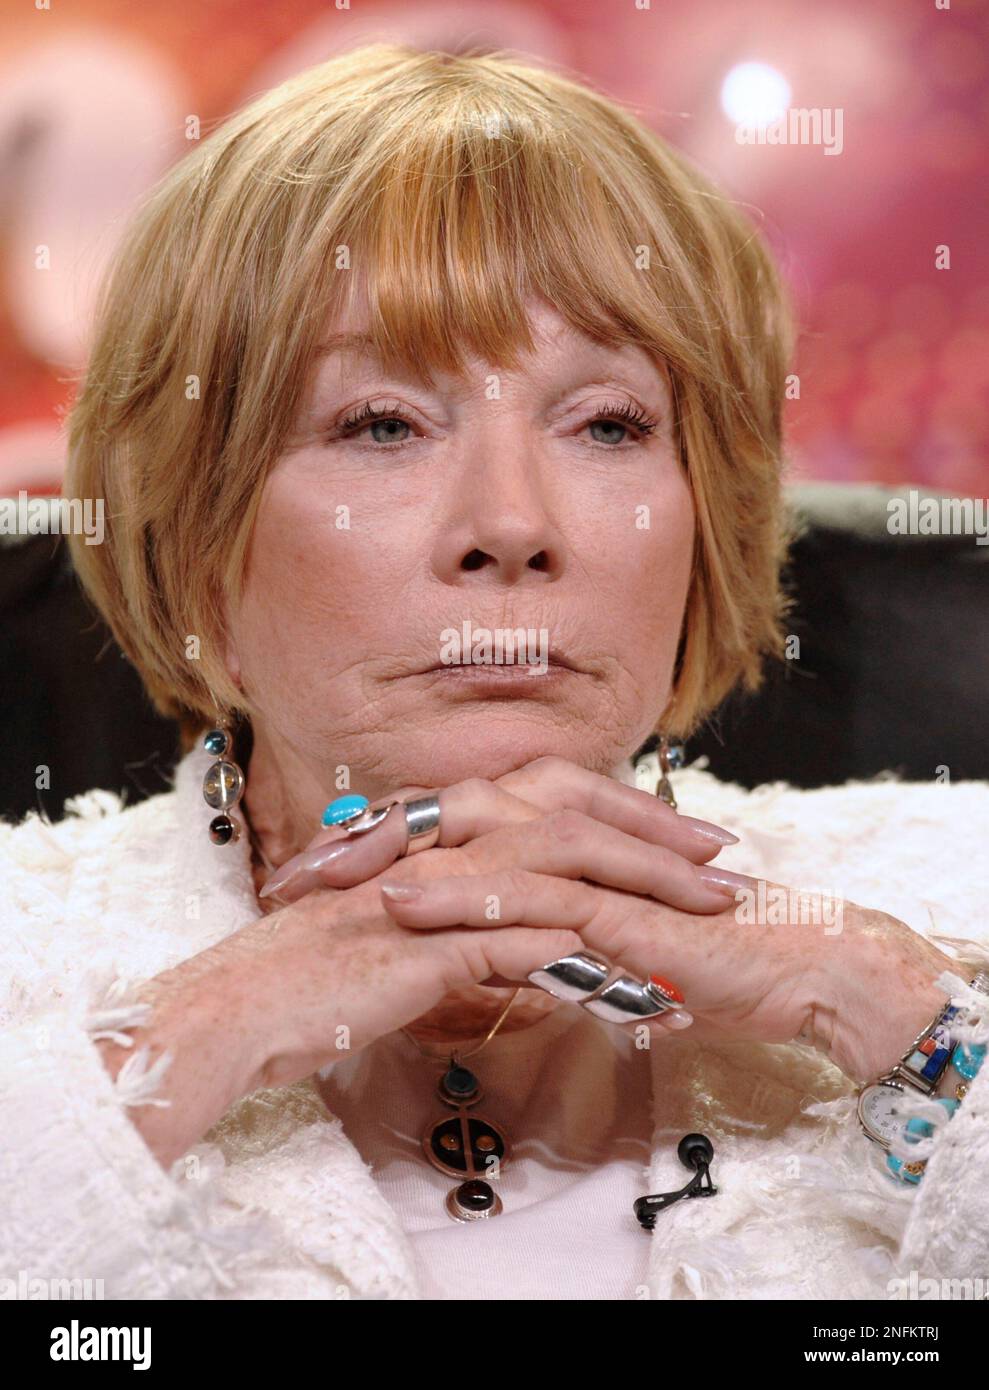 Actress Shirley Maclaine from the upcoming Lifetime TV movie Coco